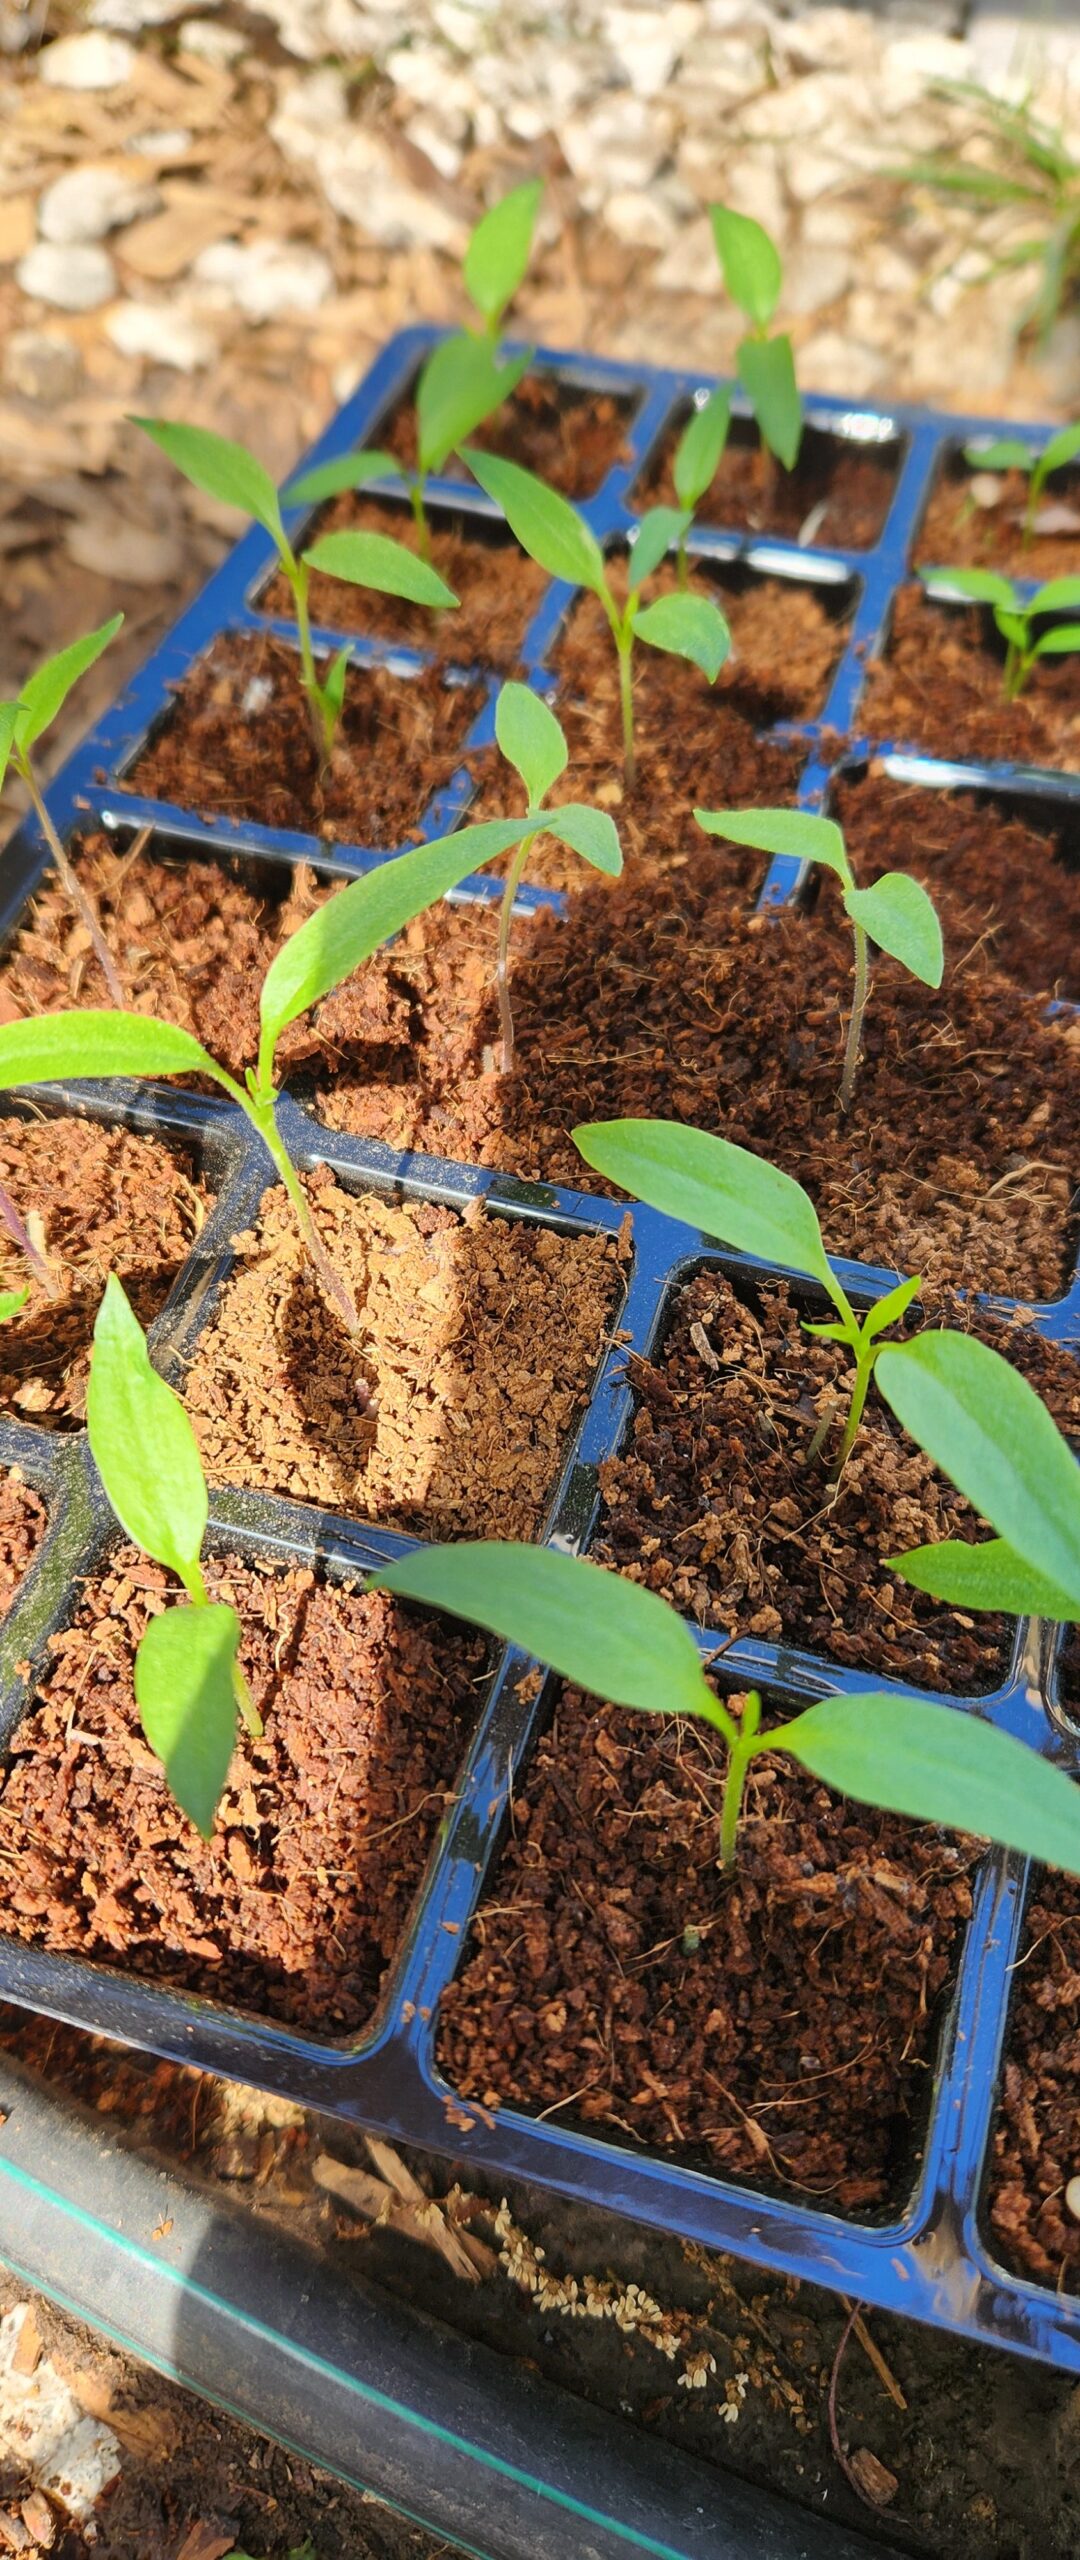 A tray of green seedlings, or seed starters